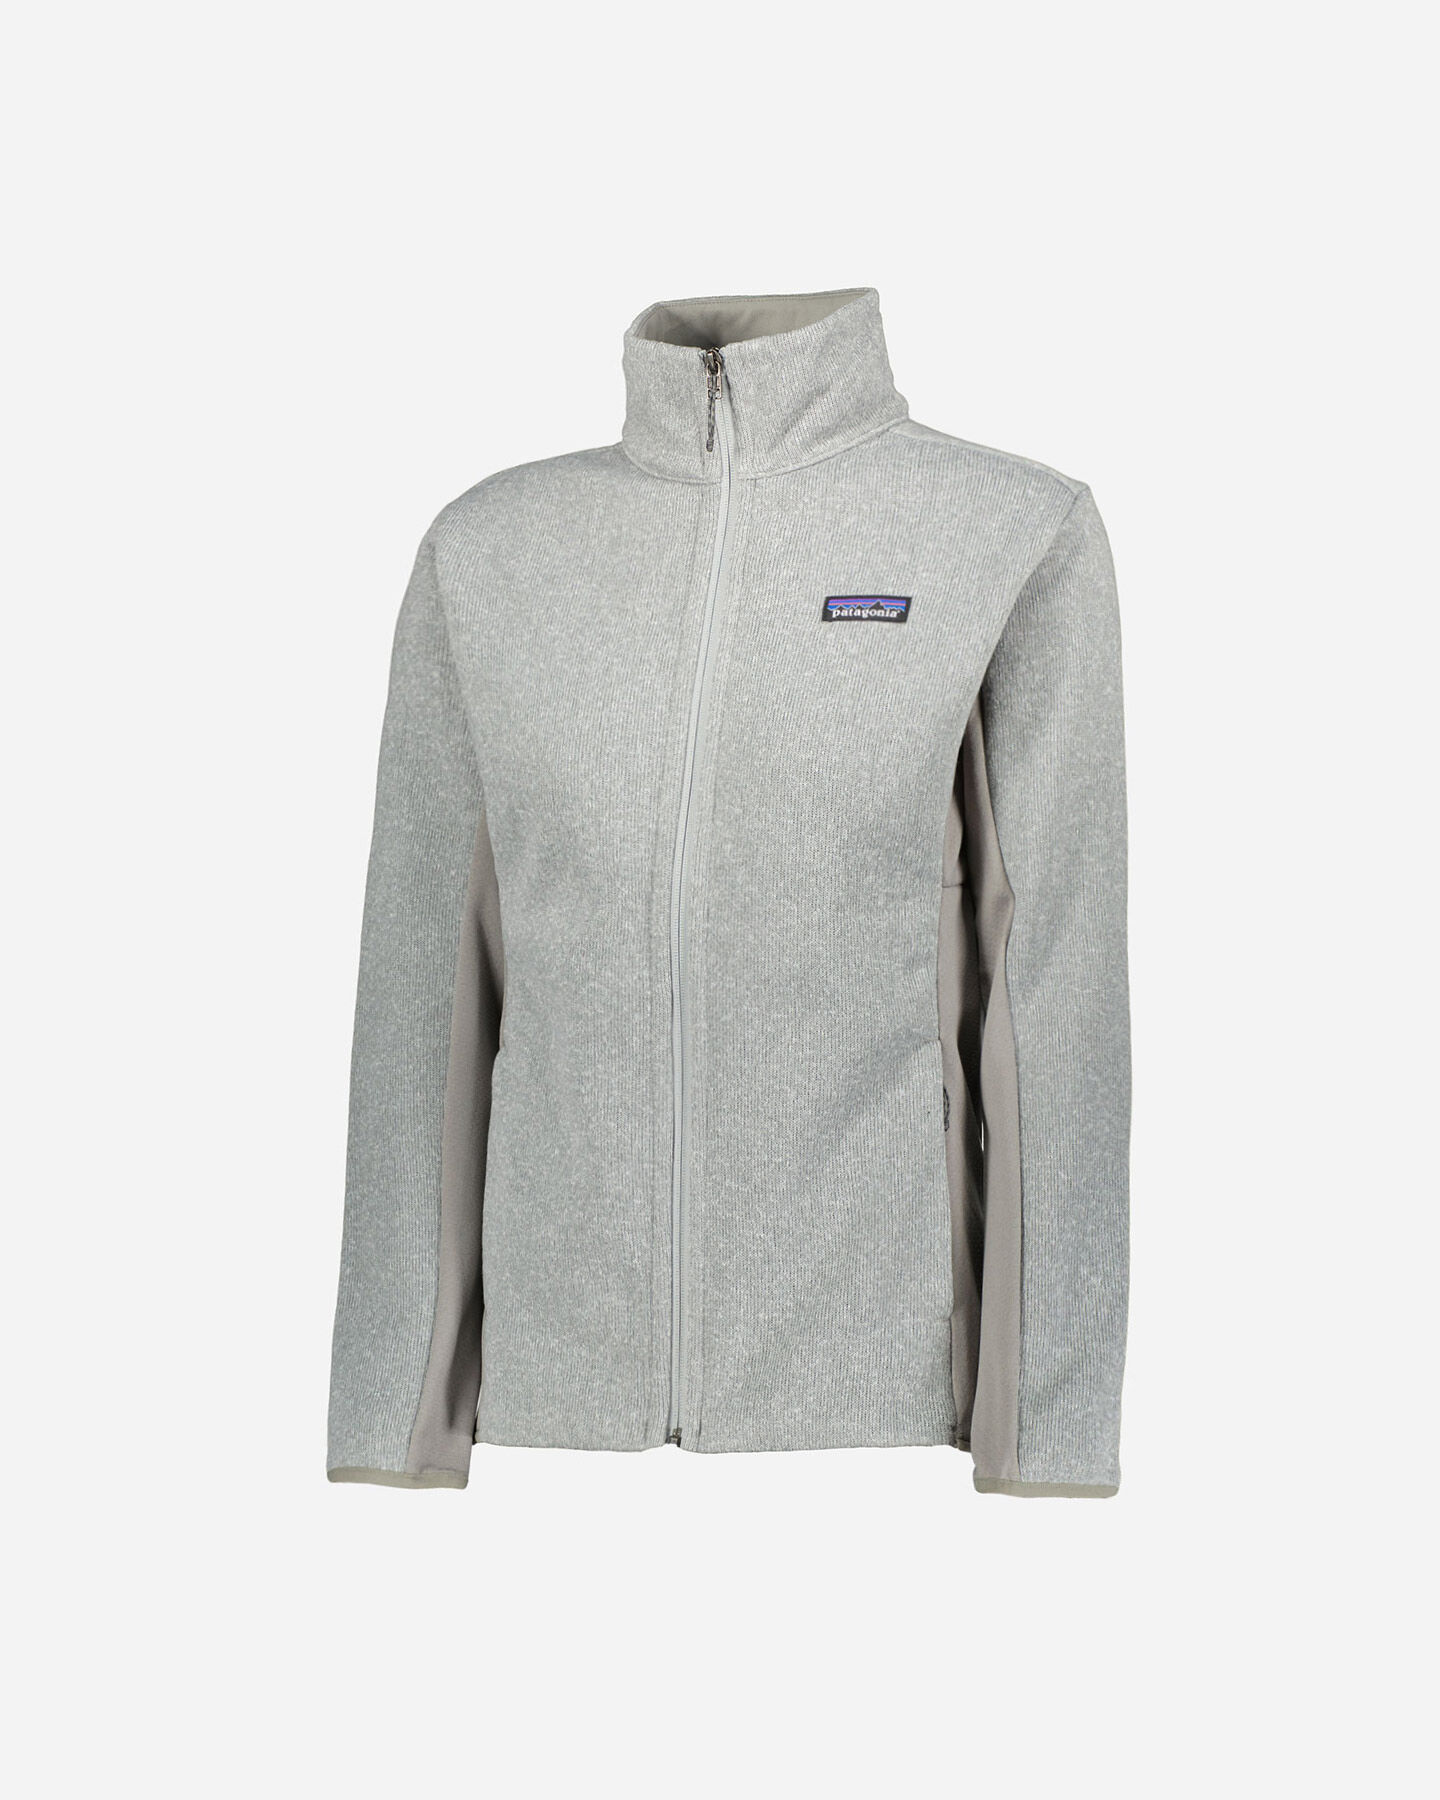  Pile PATAGONIA BETTER SWEATER LIGHTWEIGHT W S4100921|FEA|XS scatto 0